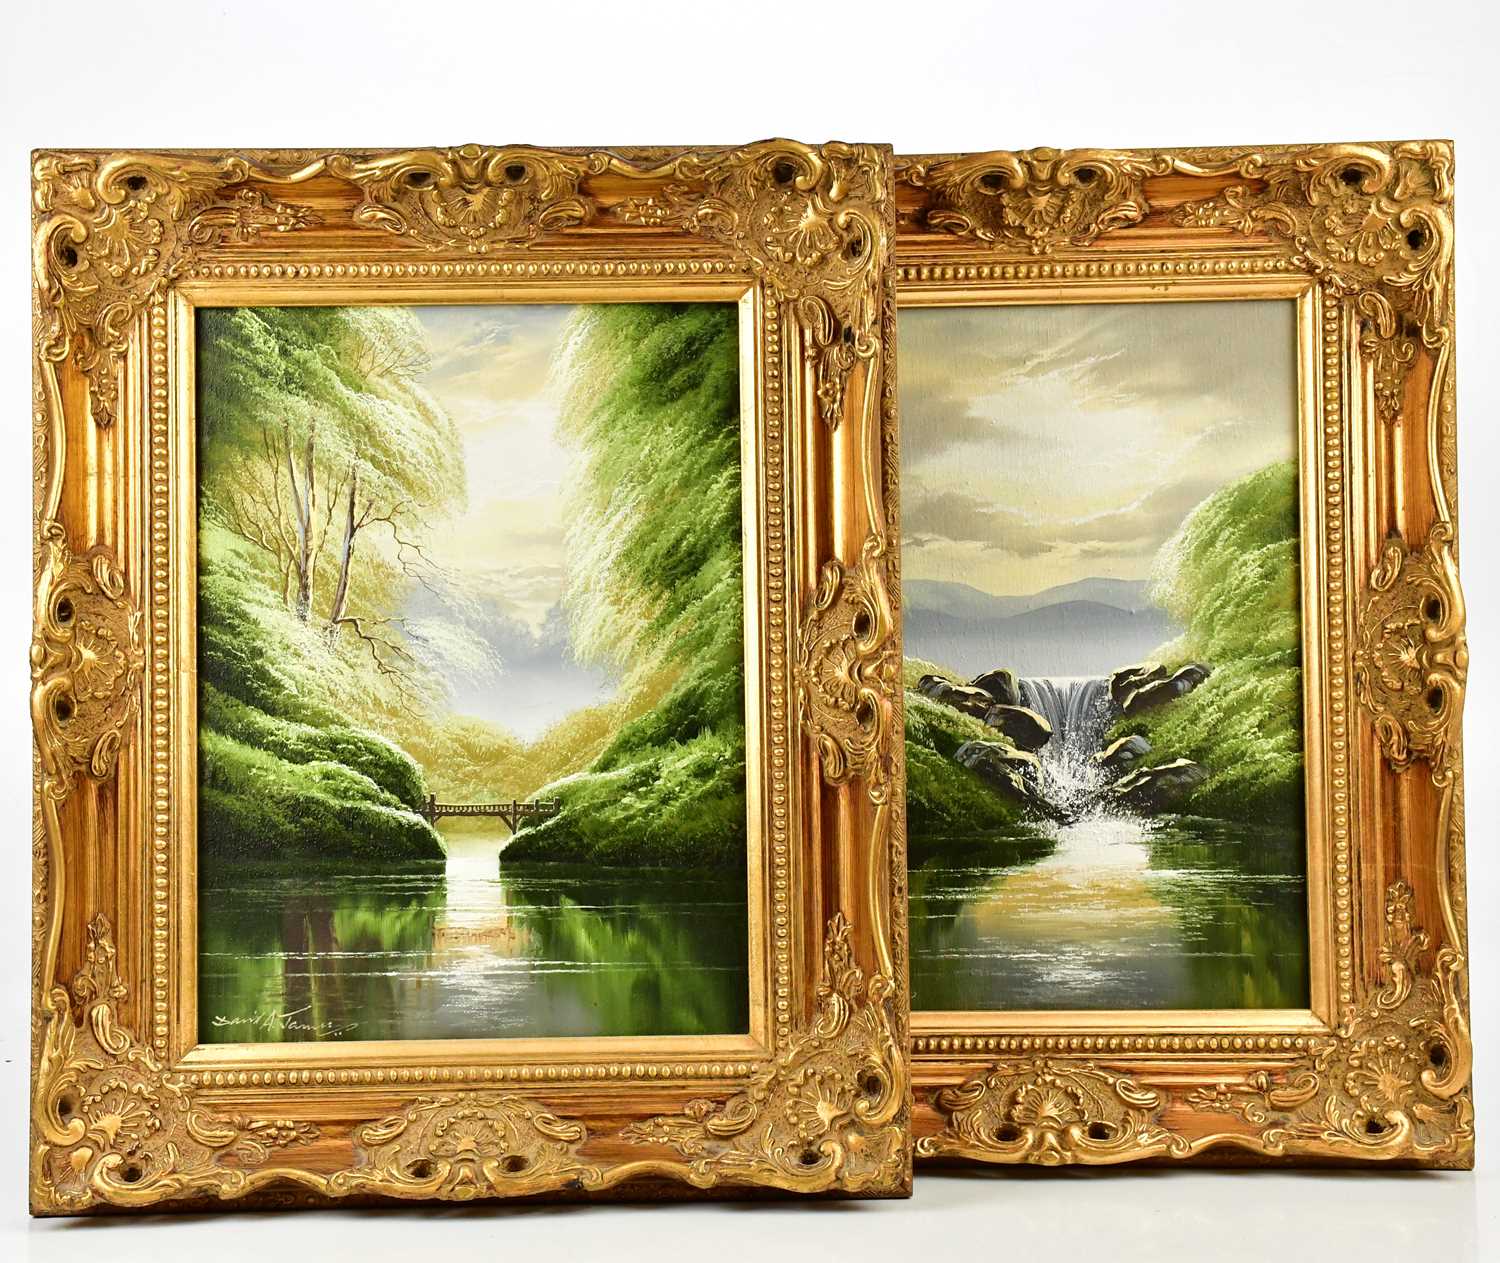 † DAVID A JAMES; a pair of oils on canvas, river scenes, both signed lower left, 40 x 29cm, framed.